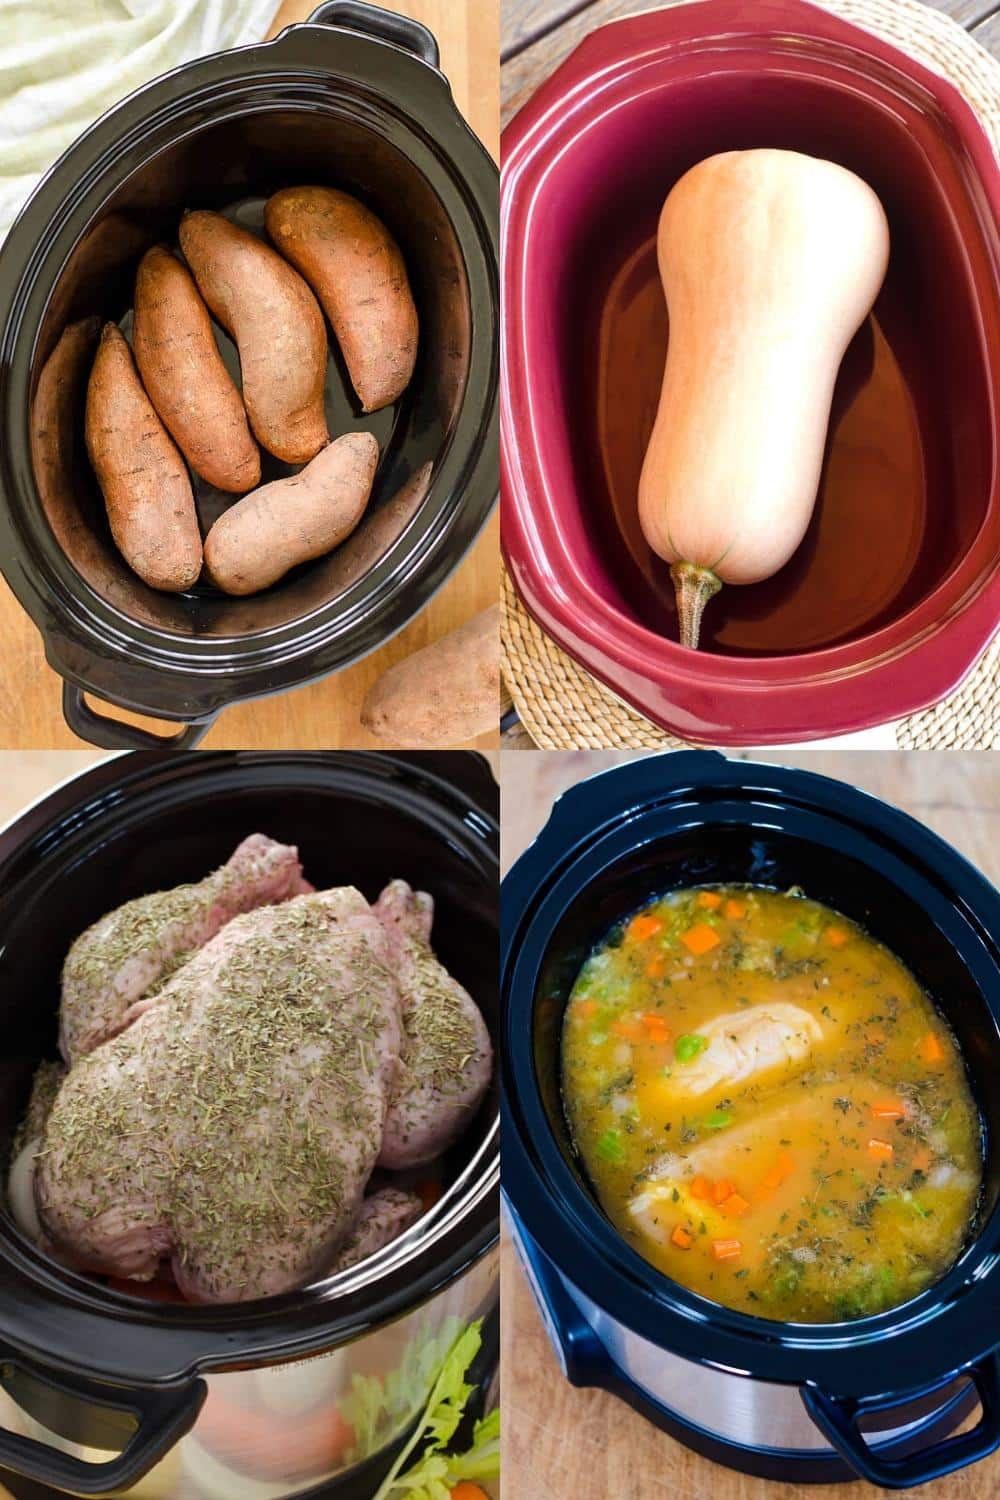 Slow cooker chicken, soup, squash, sweet potatoes